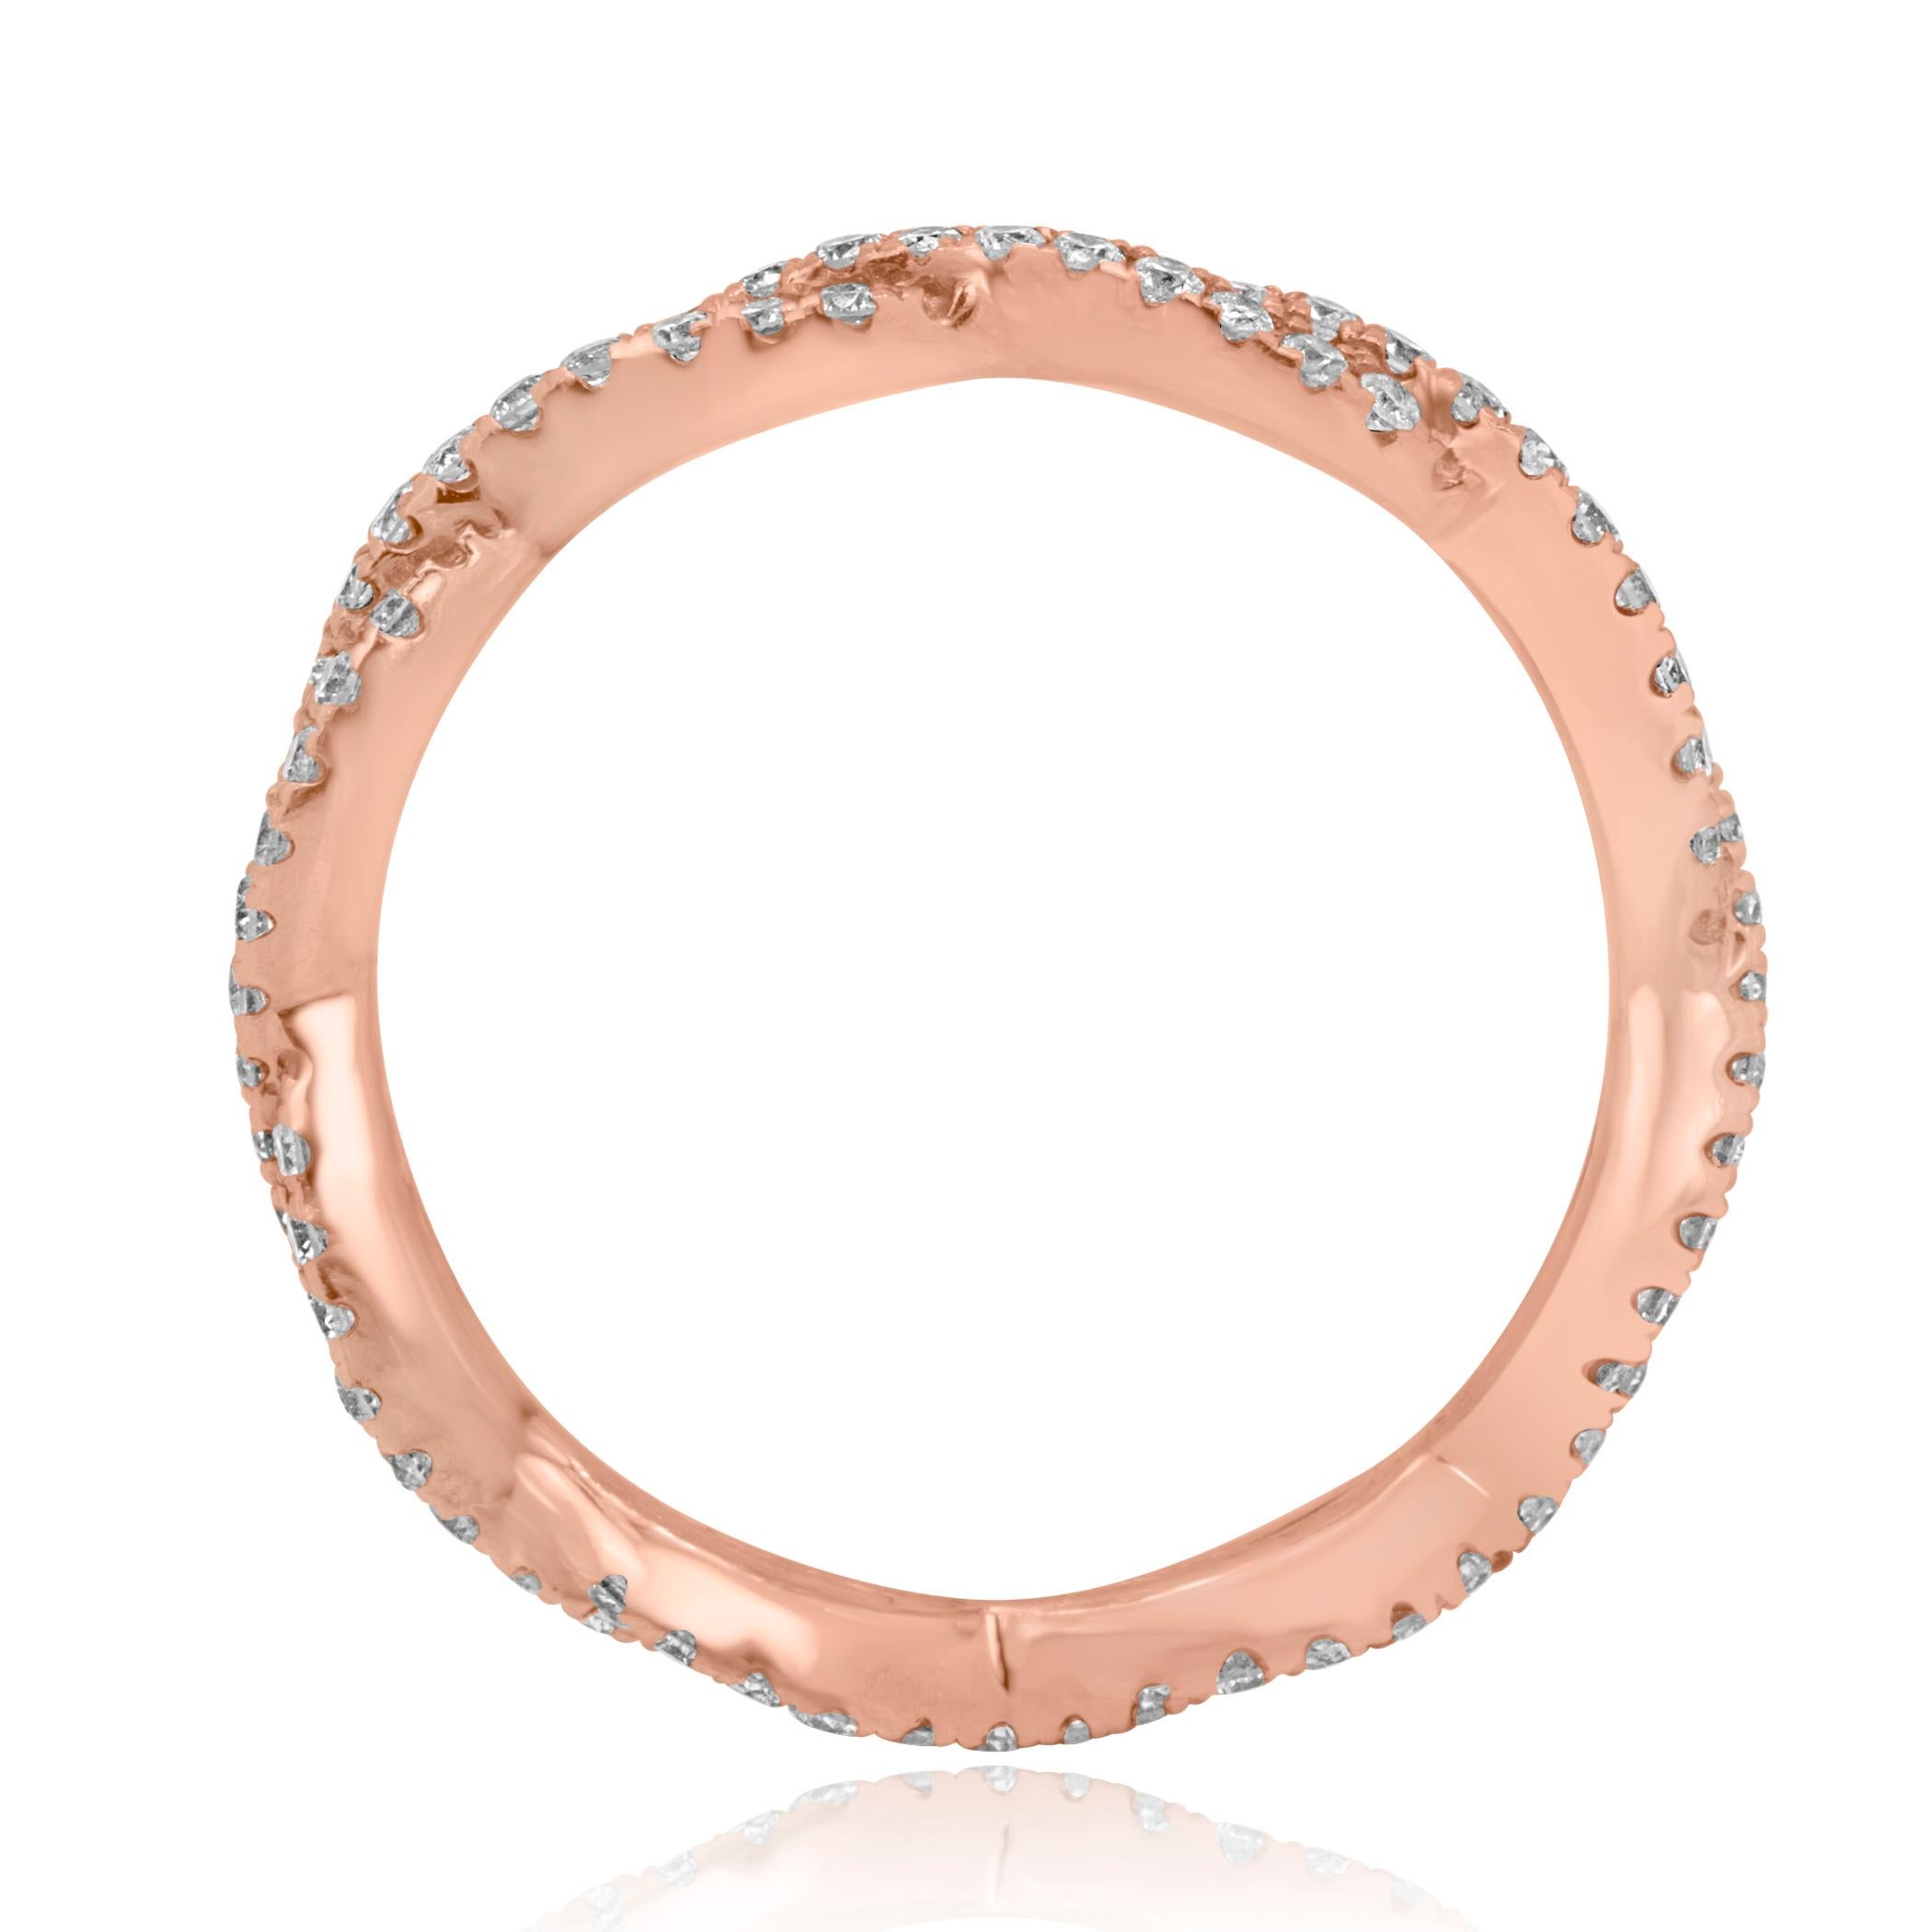 Women's Natural Pink Diamond Twisted Rope Style Rose Gold Stackable Band Fashion Ring